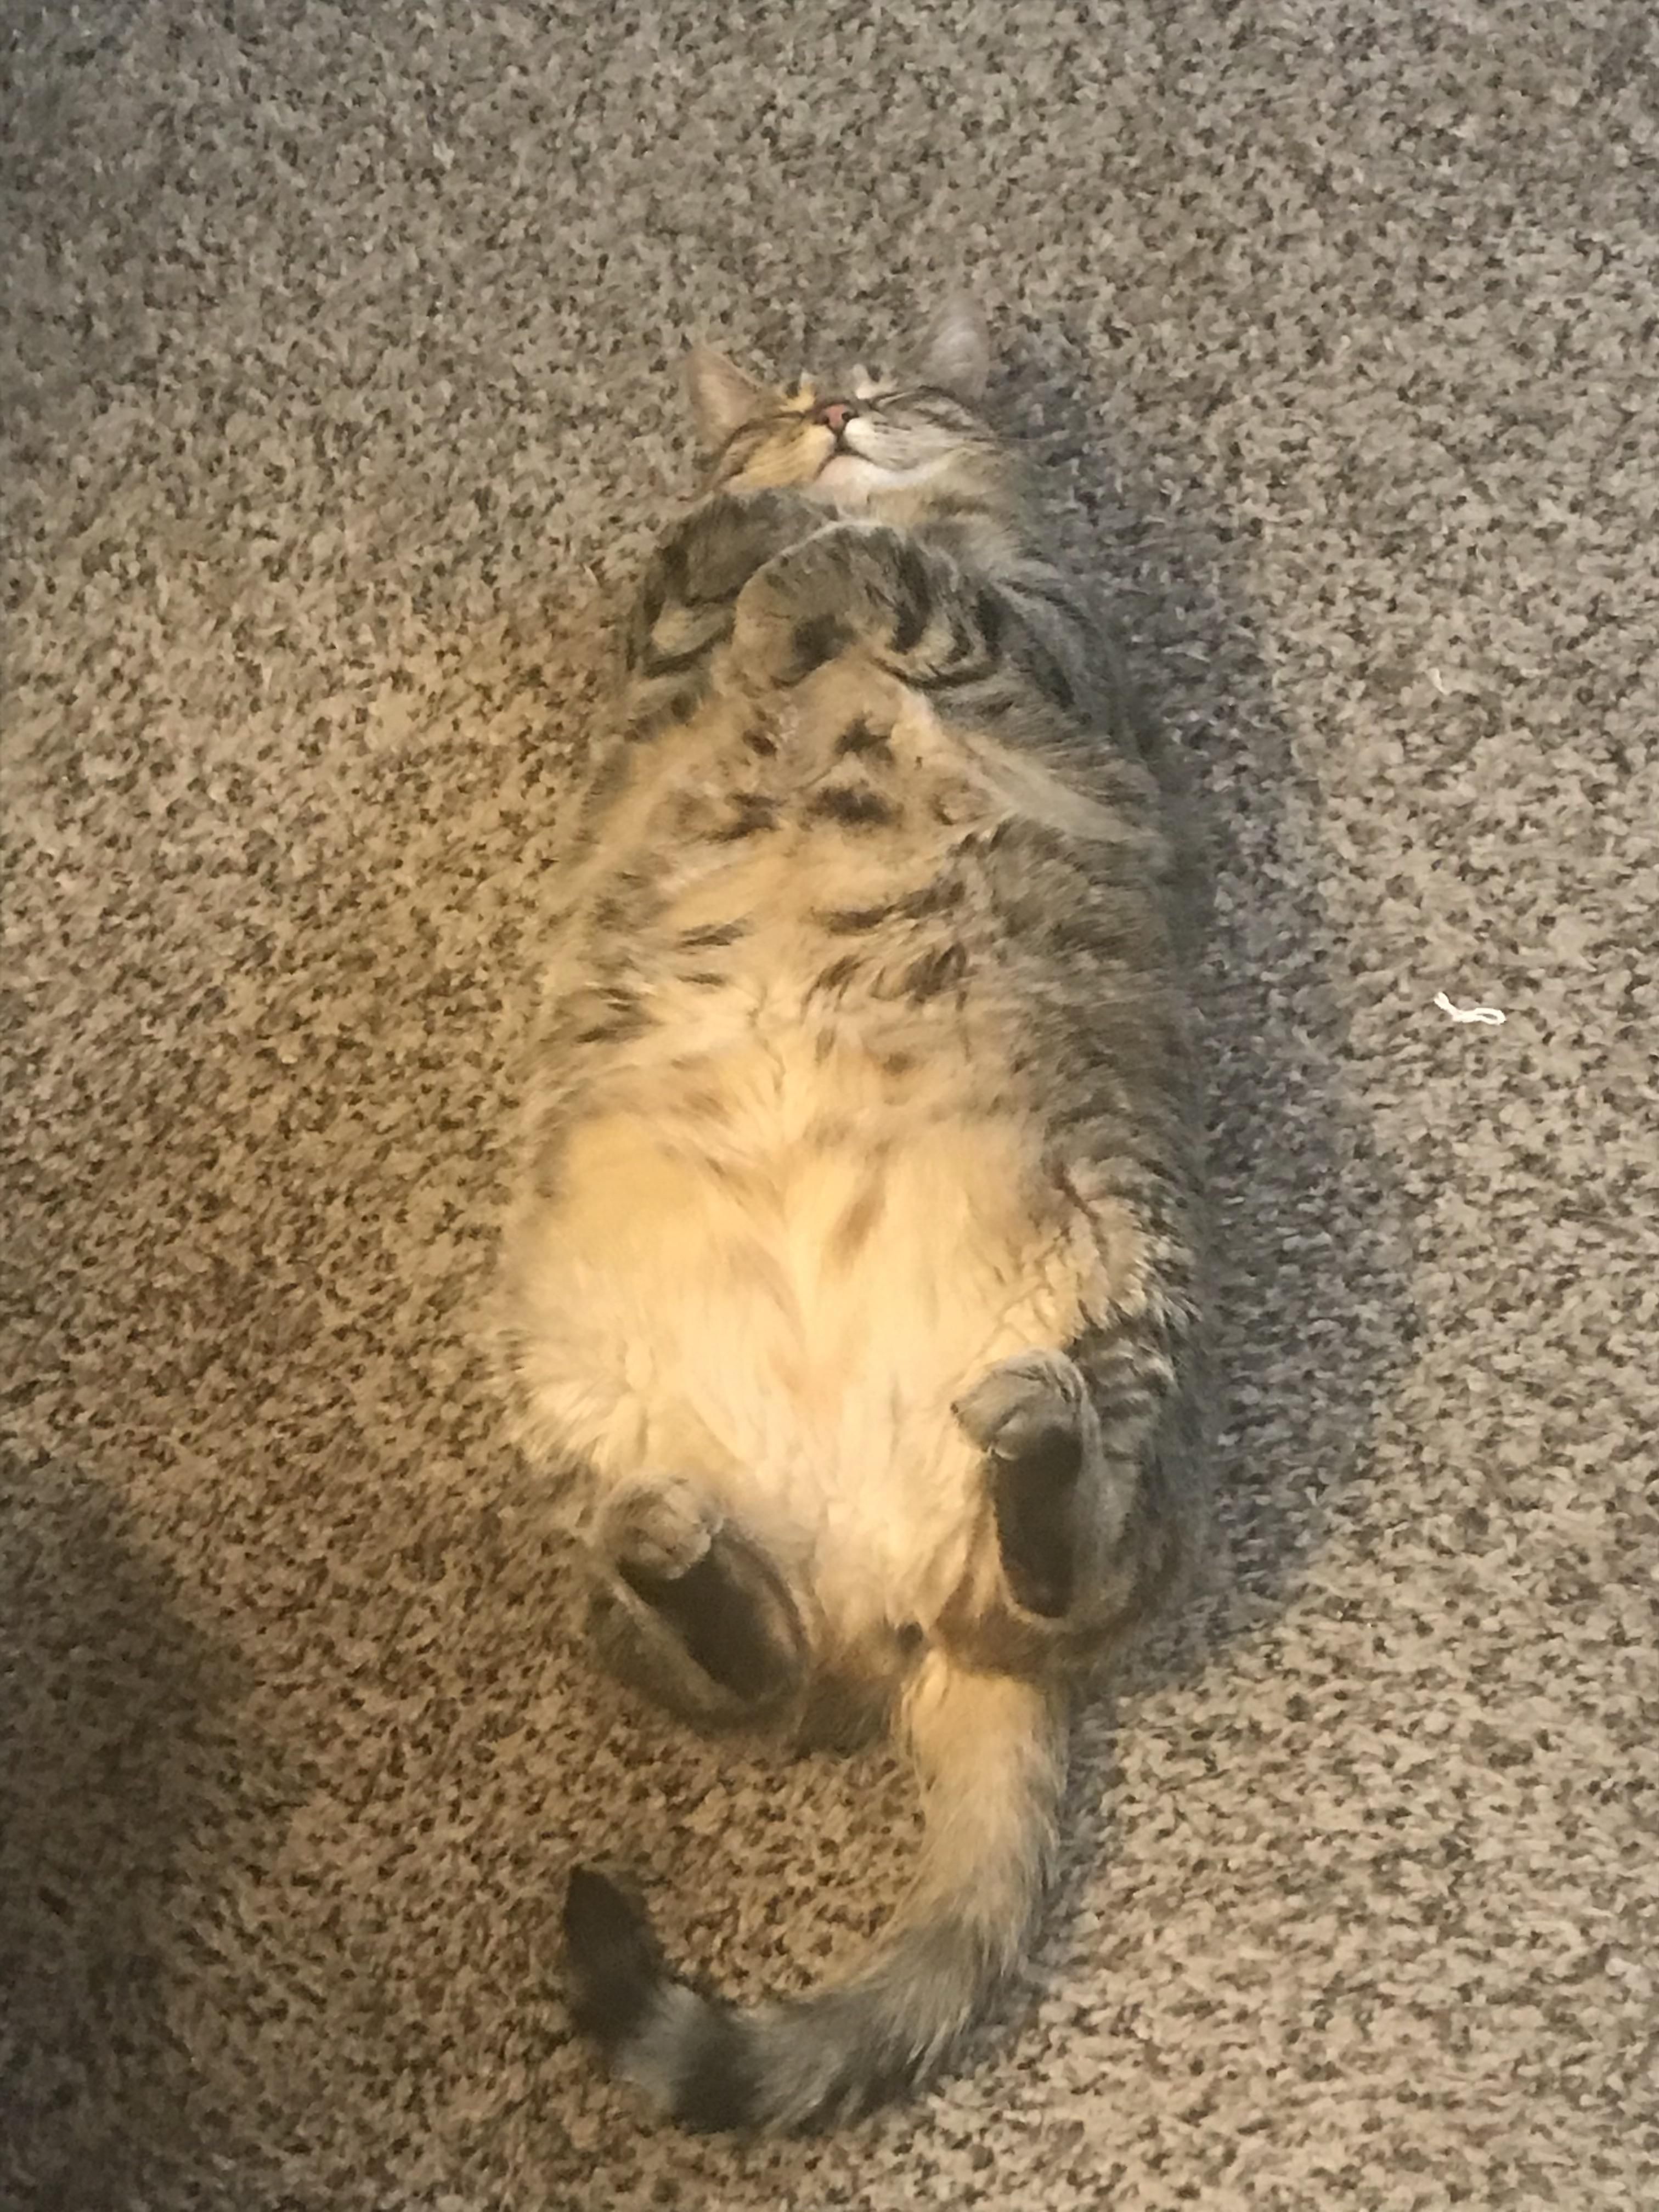 My high chubby little weirdo trying to blend in with the carpet after eating 6 leaves of catnip.